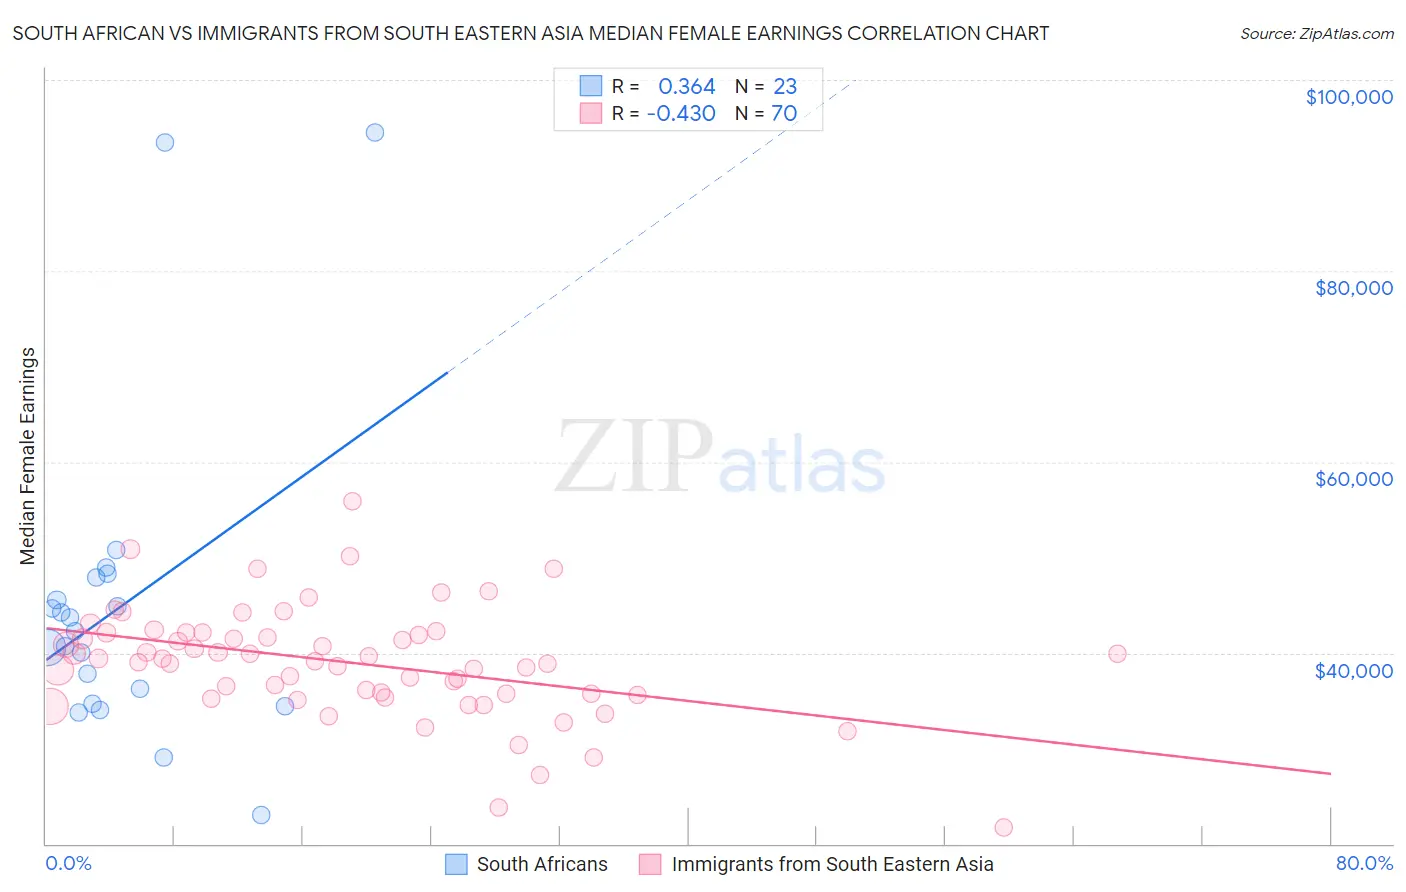 South African vs Immigrants from South Eastern Asia Median Female Earnings